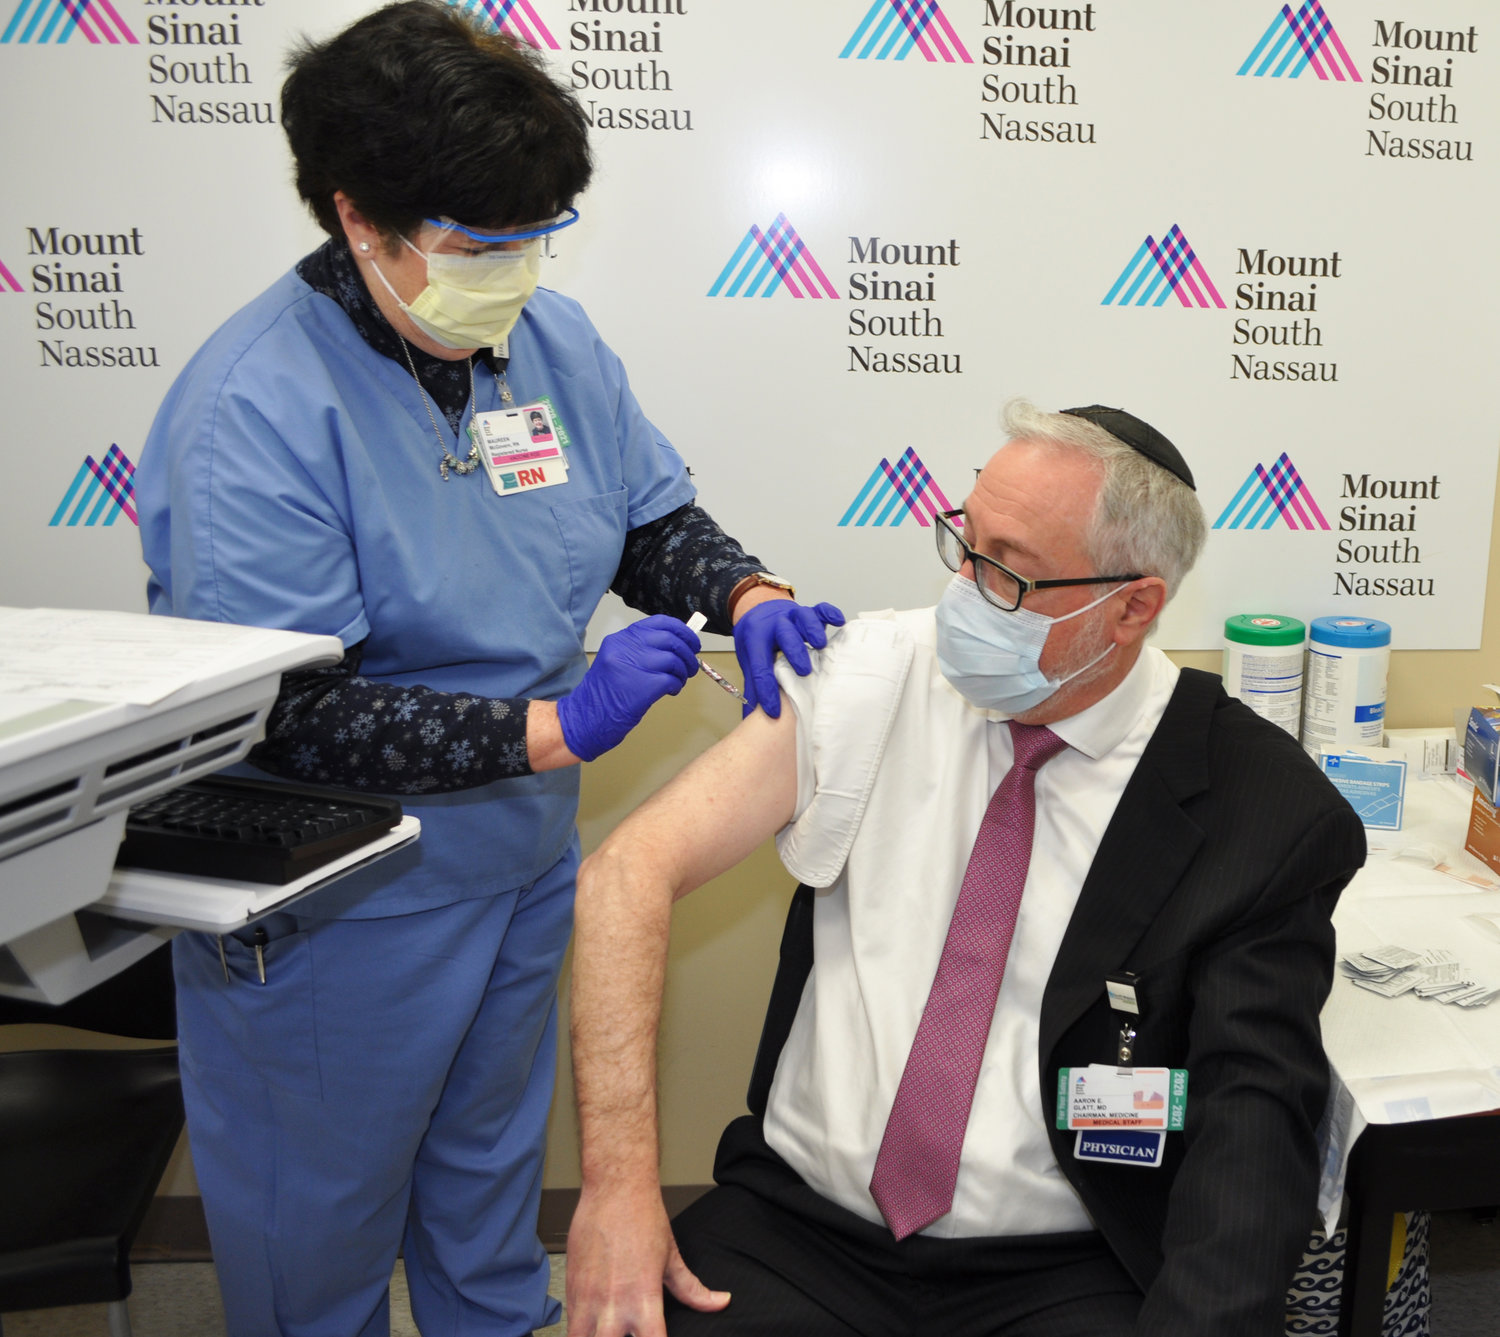 Dr. Aaron E. Glatt, chairman of the Department of Medicine and chief of infectious diseases at Mount Sinai South Nassau, received the second dose of the Covid-19 vaccine from retired Nurse Maureen McGovern.